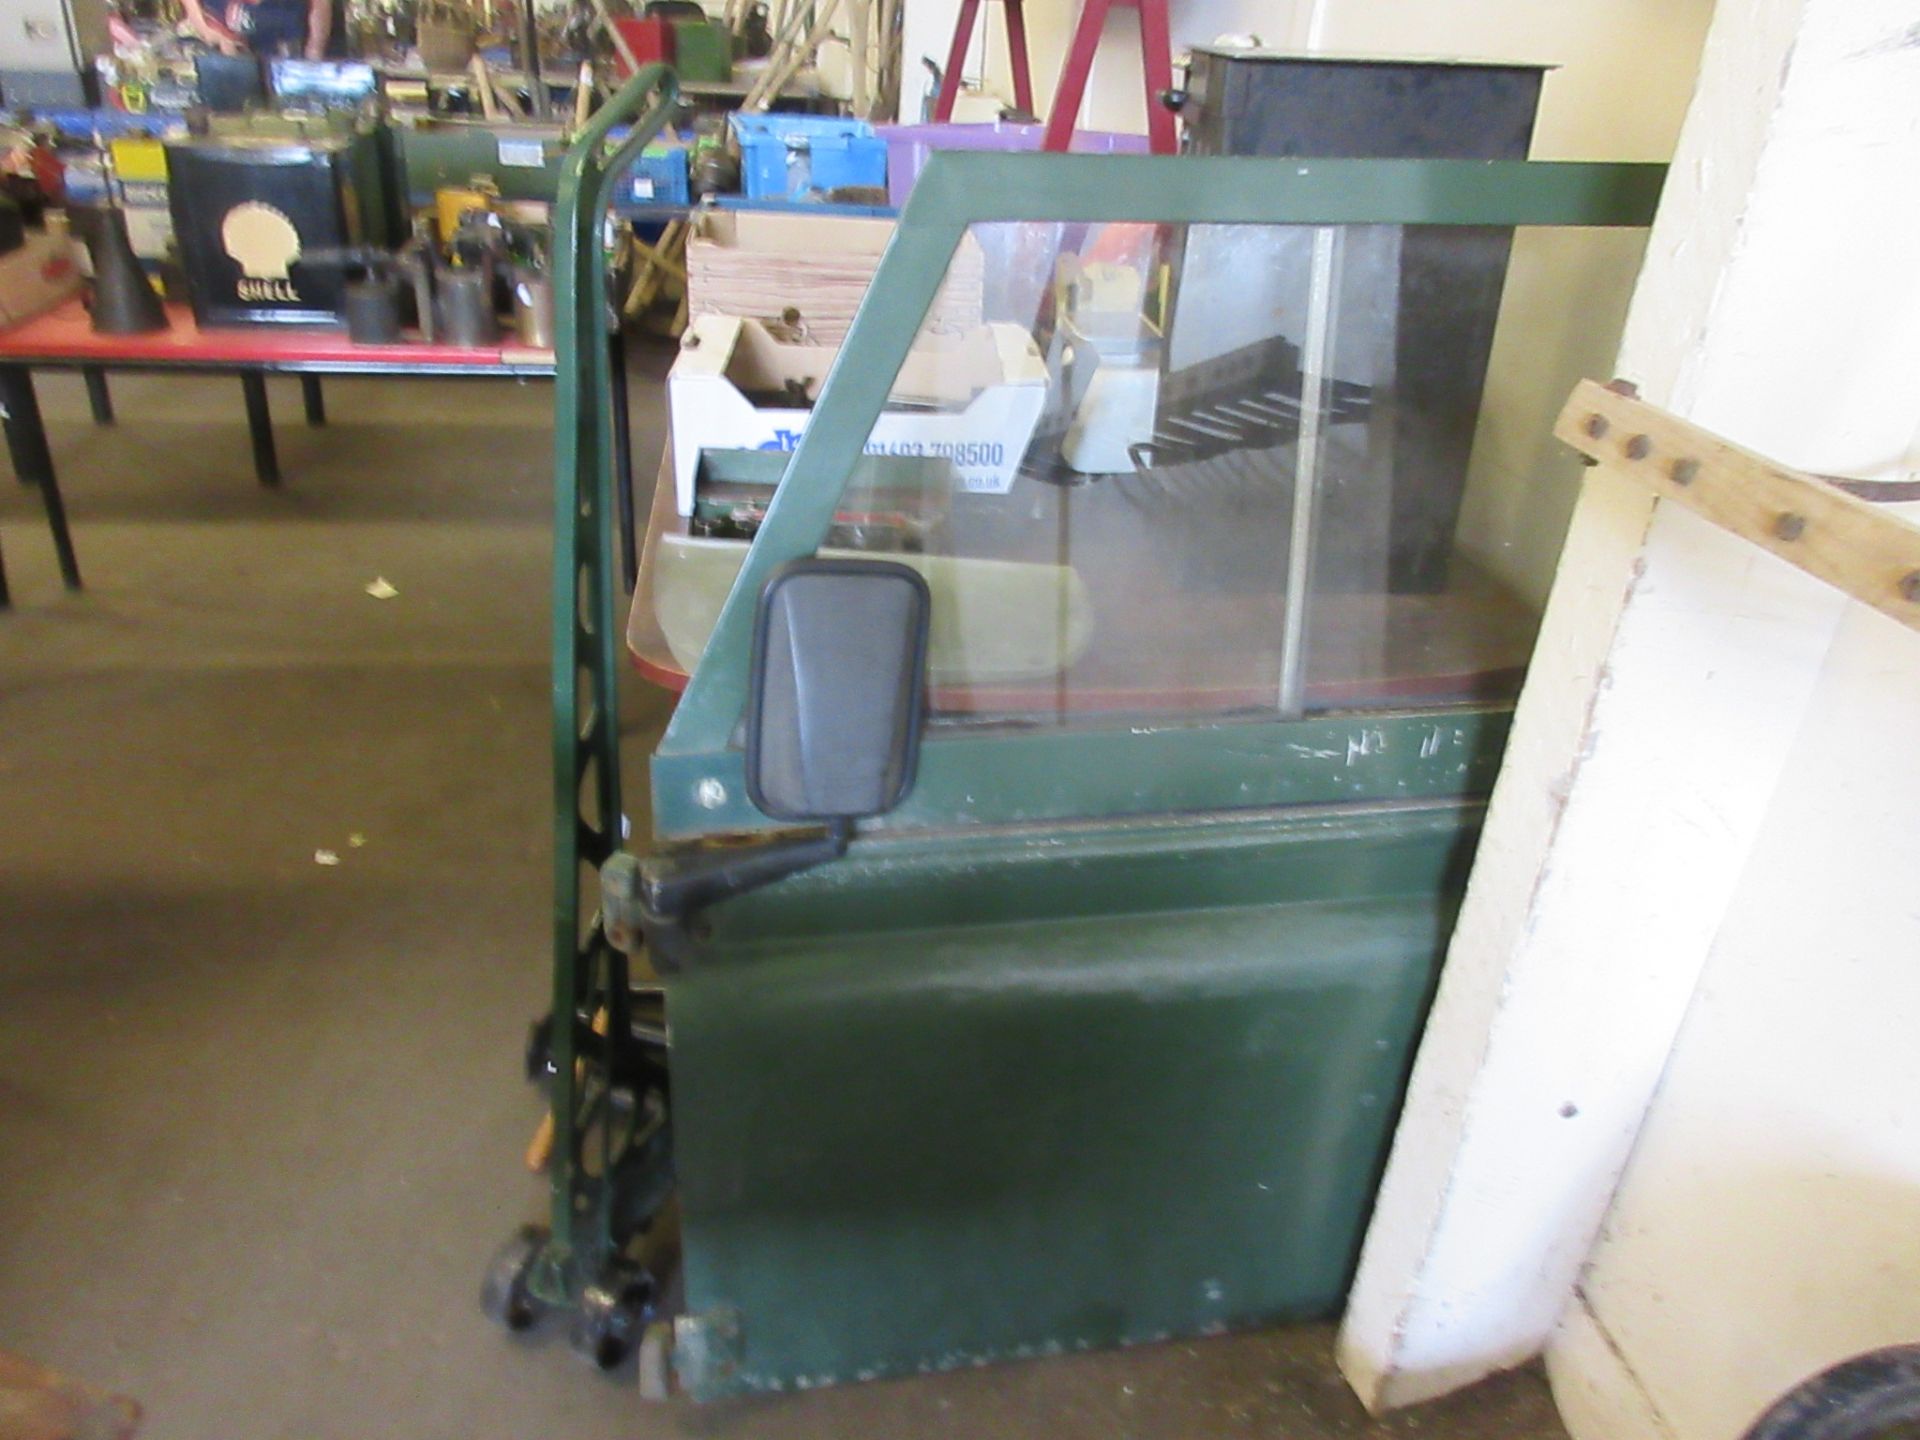 Land Rover Door and Cab Glass